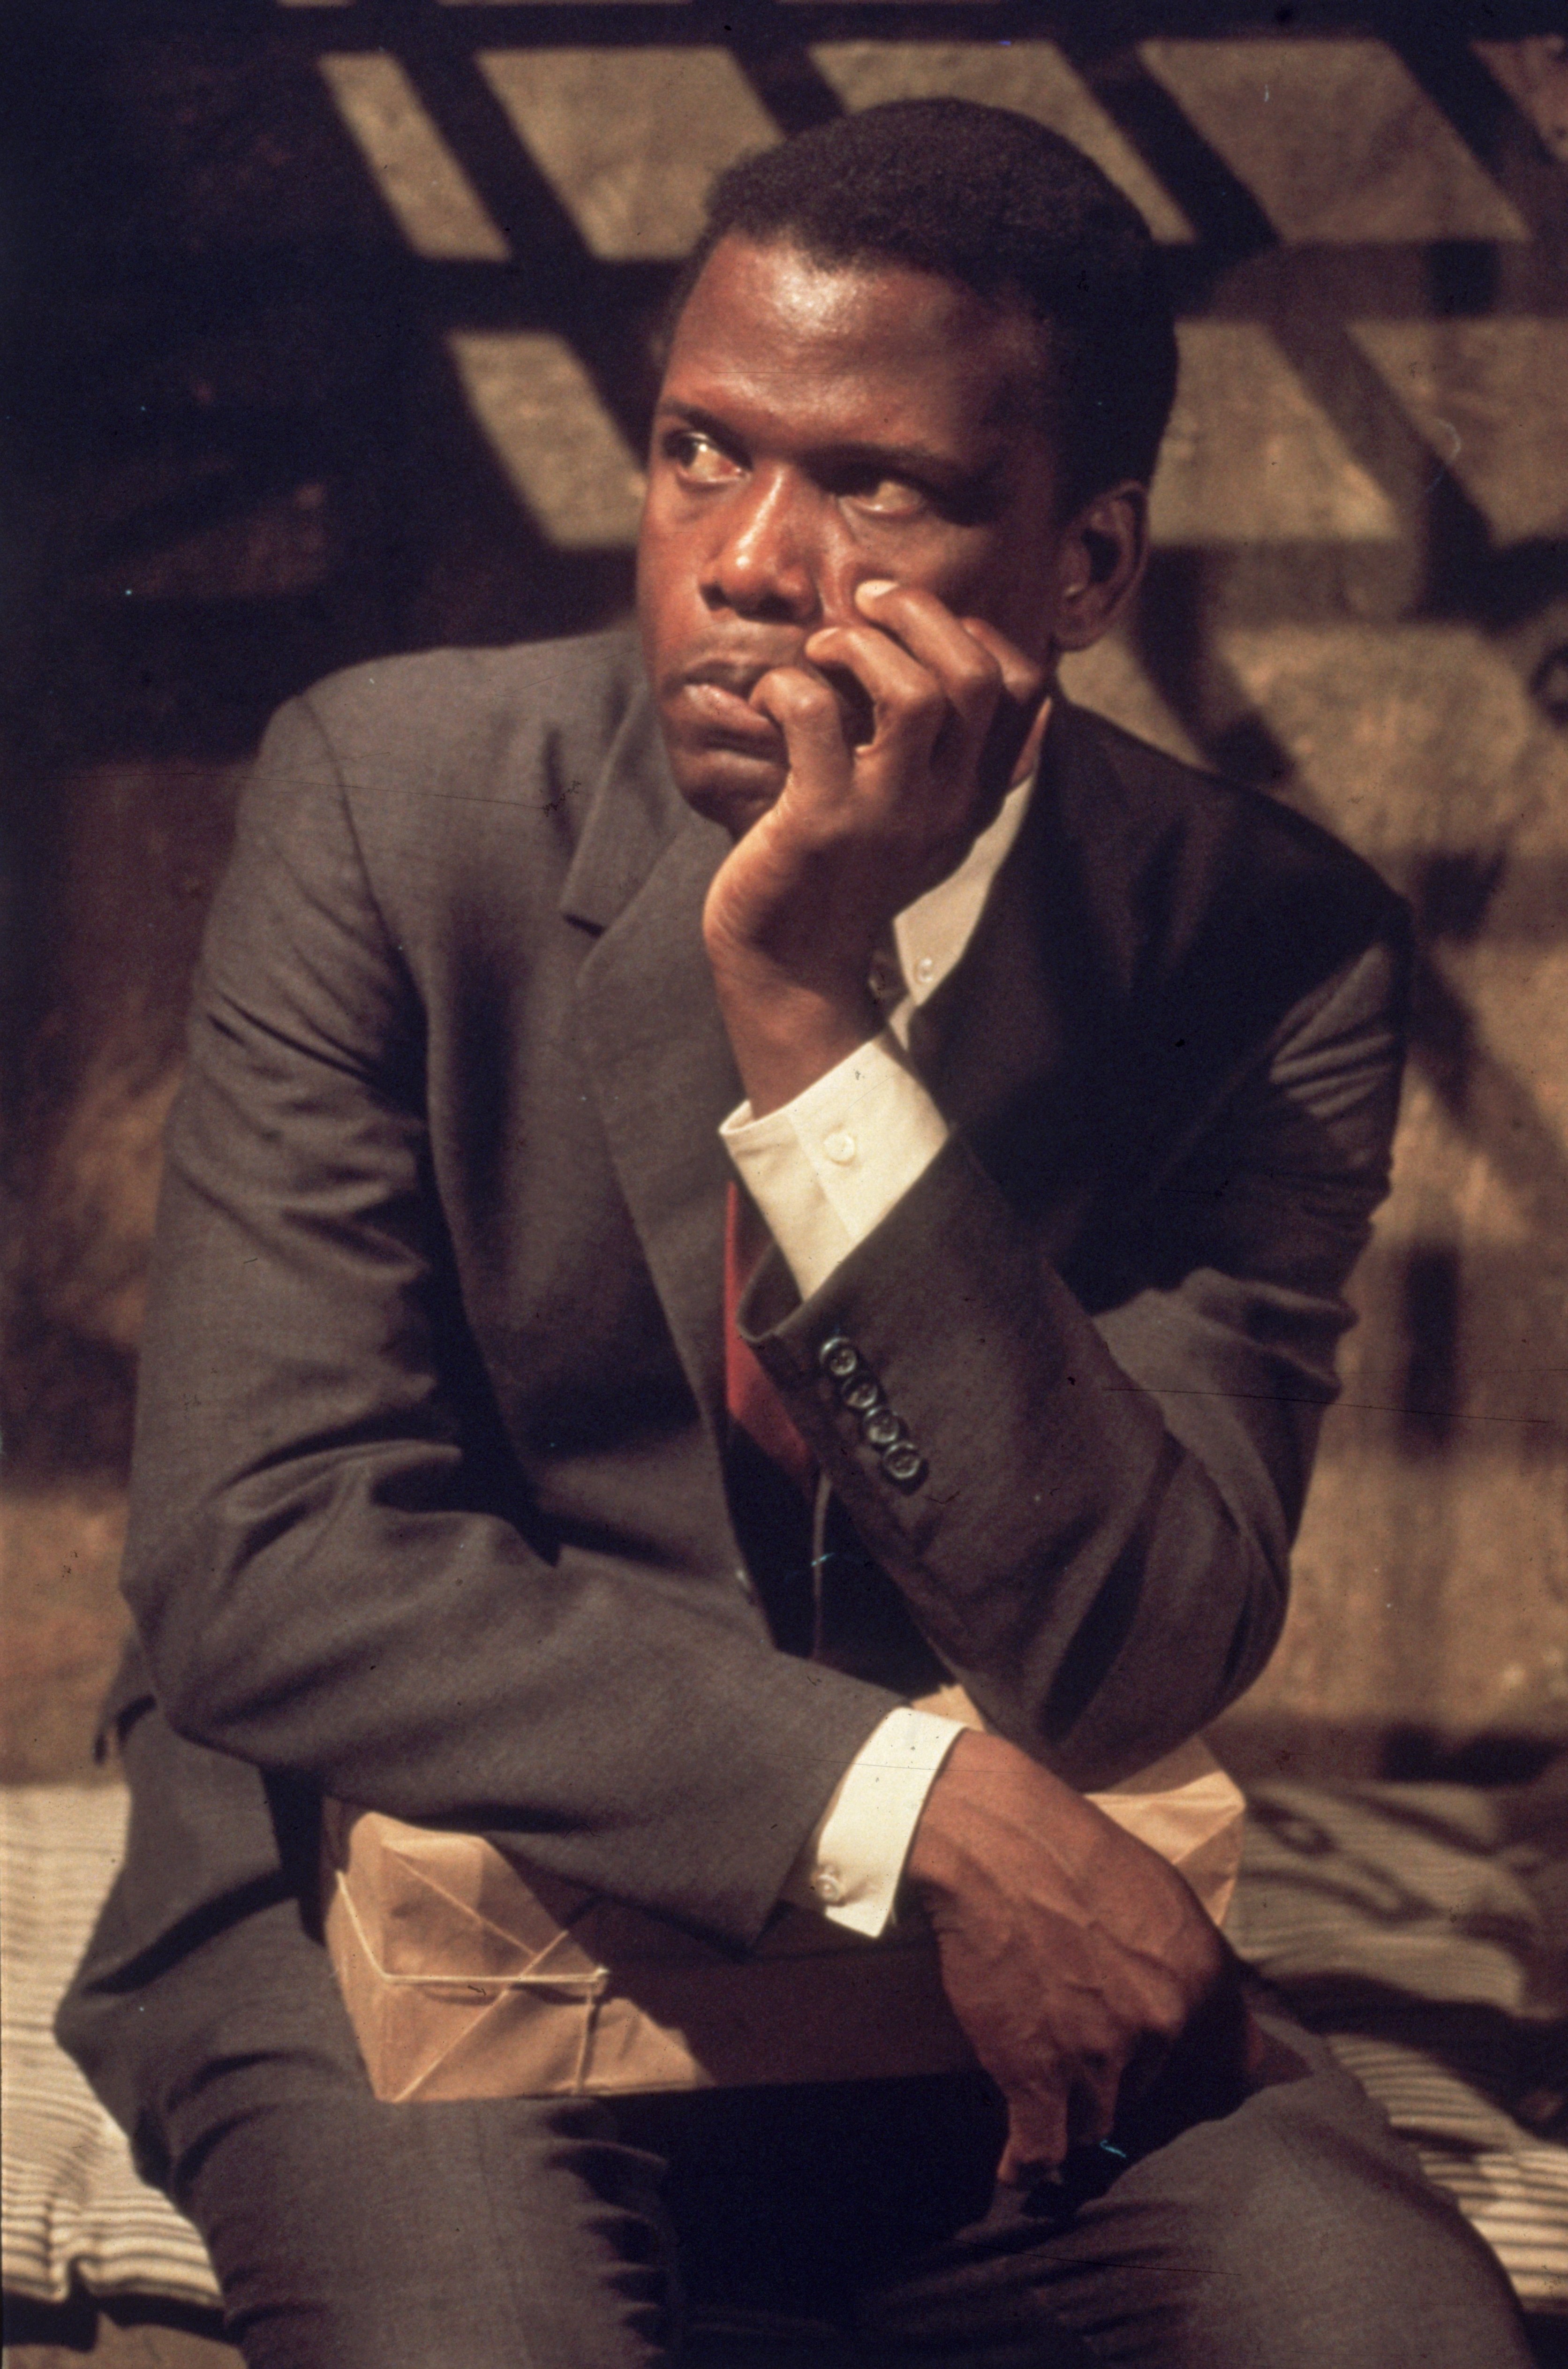 Sidney Poitier photographed while filming "In the Heat of the Night" in 1967 | Photo: Getty Images